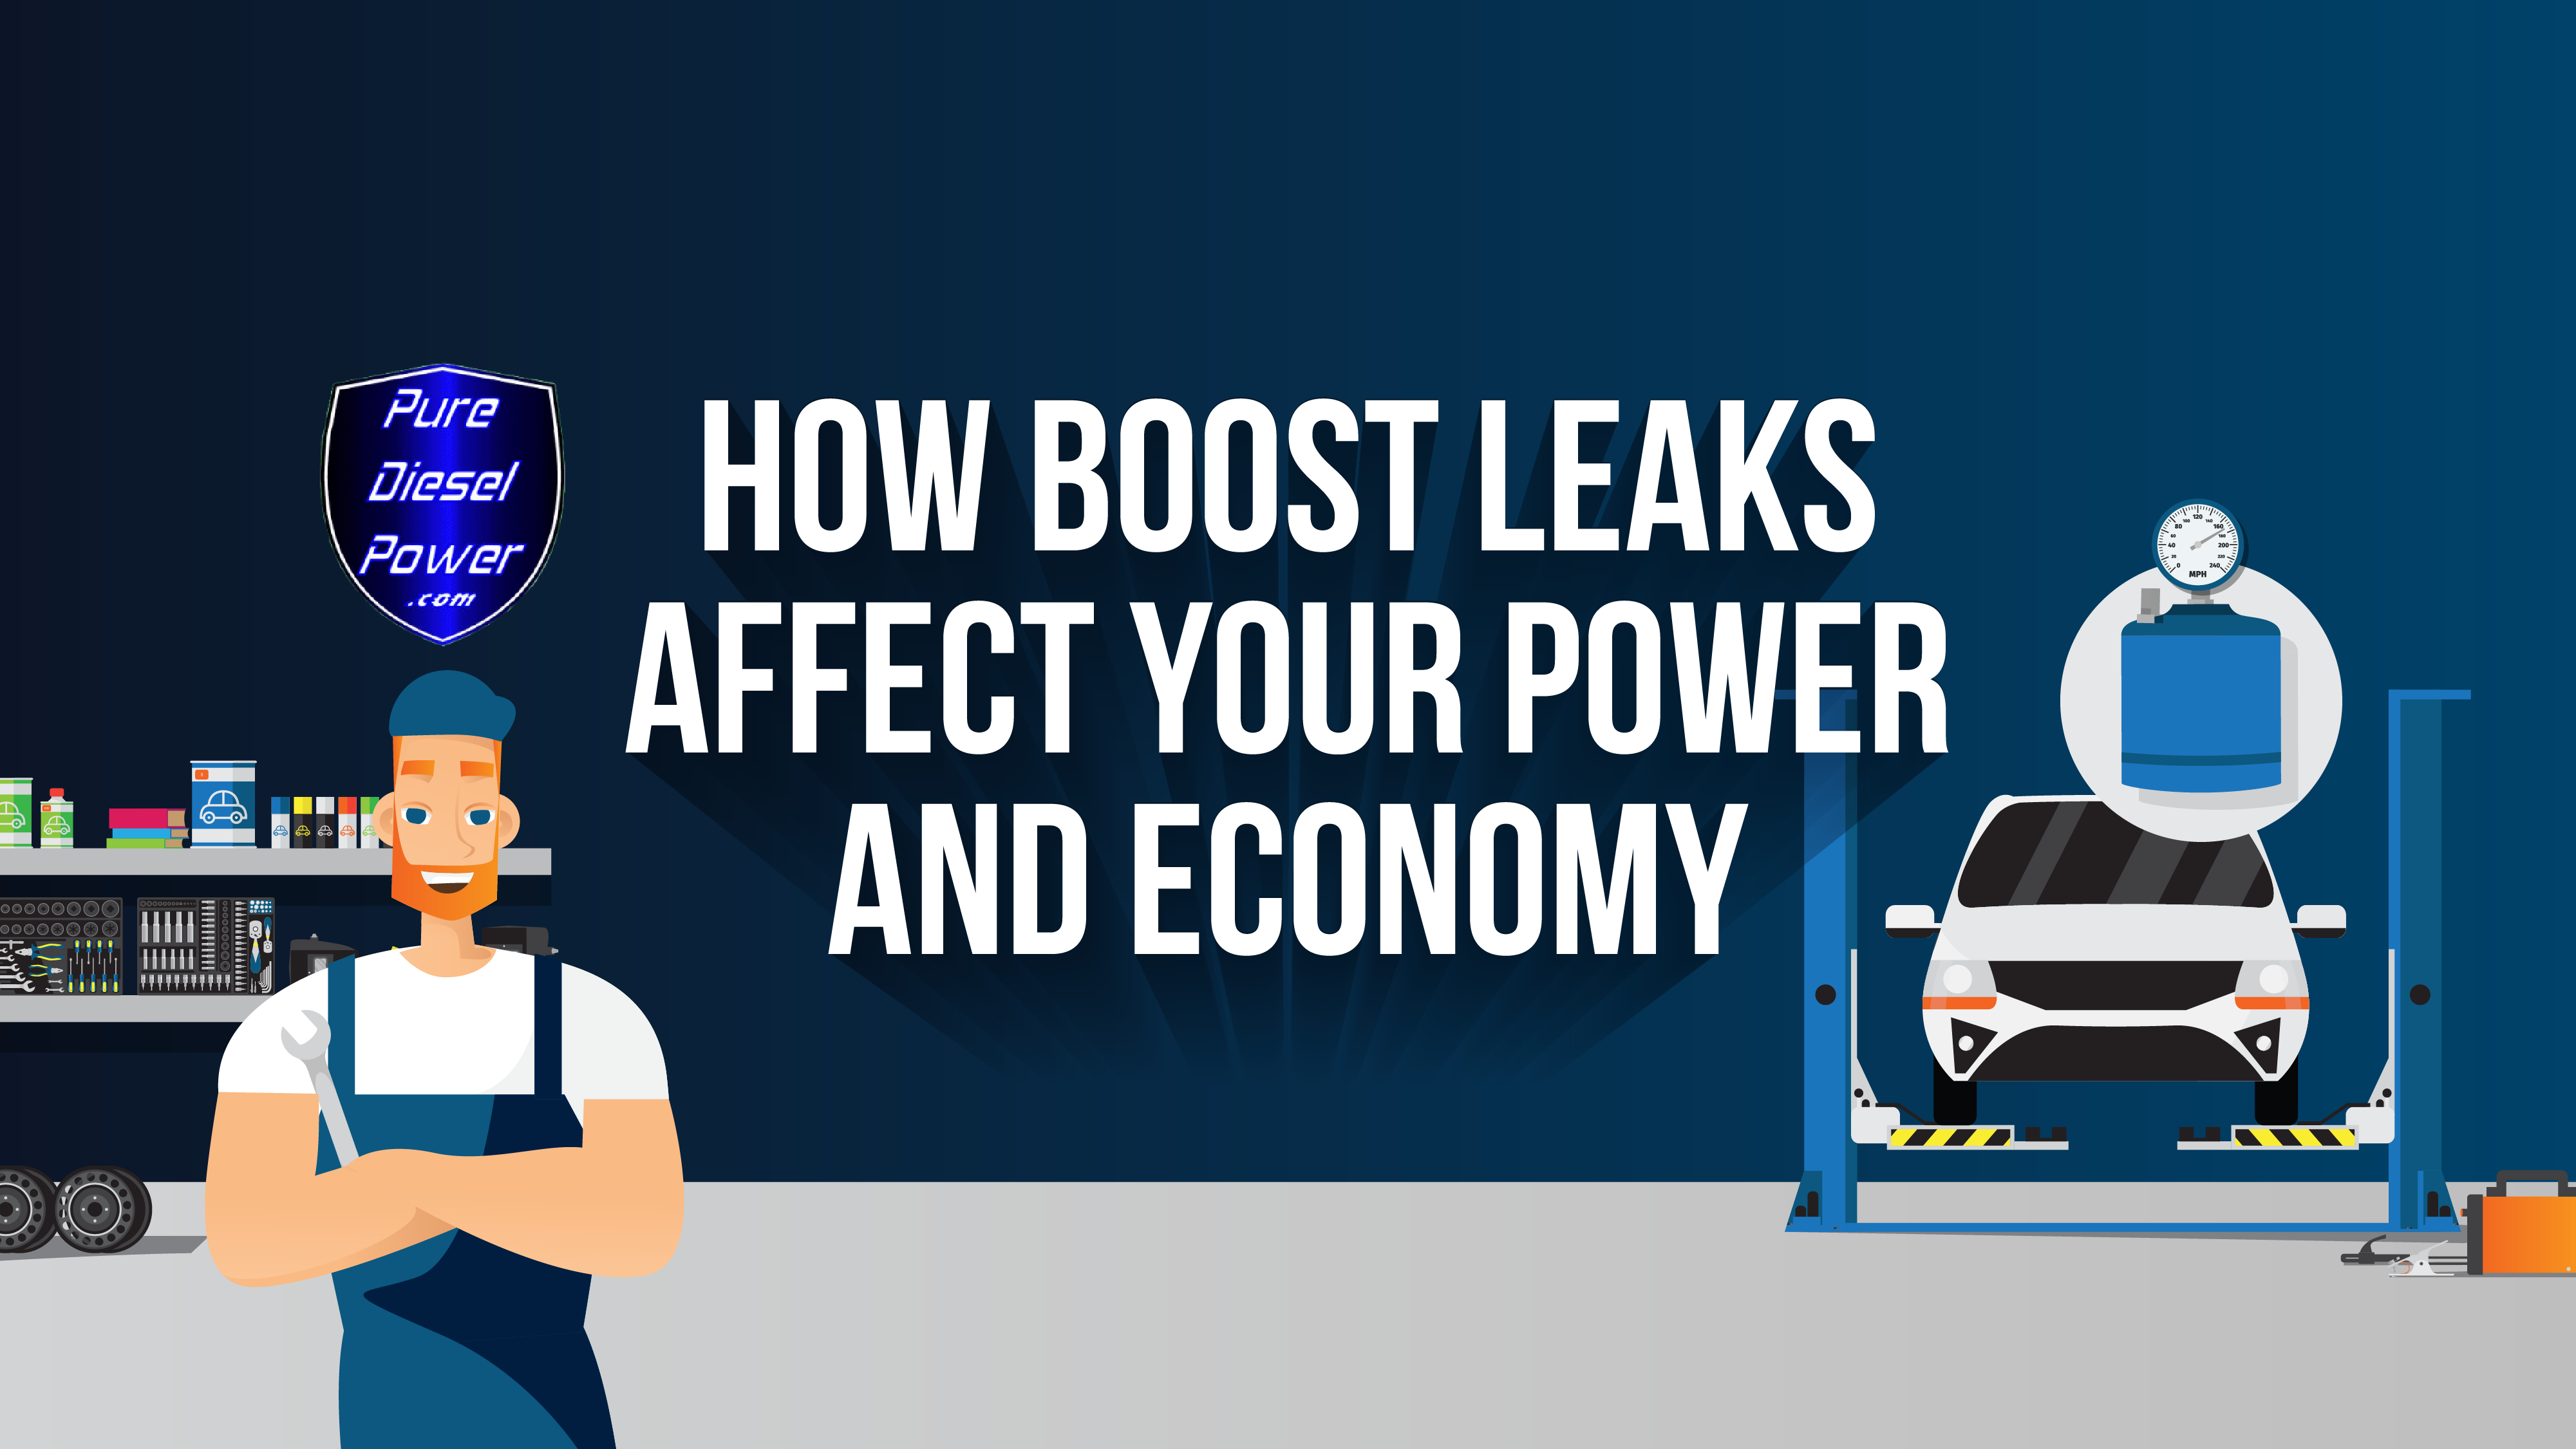 How Boost Leaks Affect Your Power and Economy